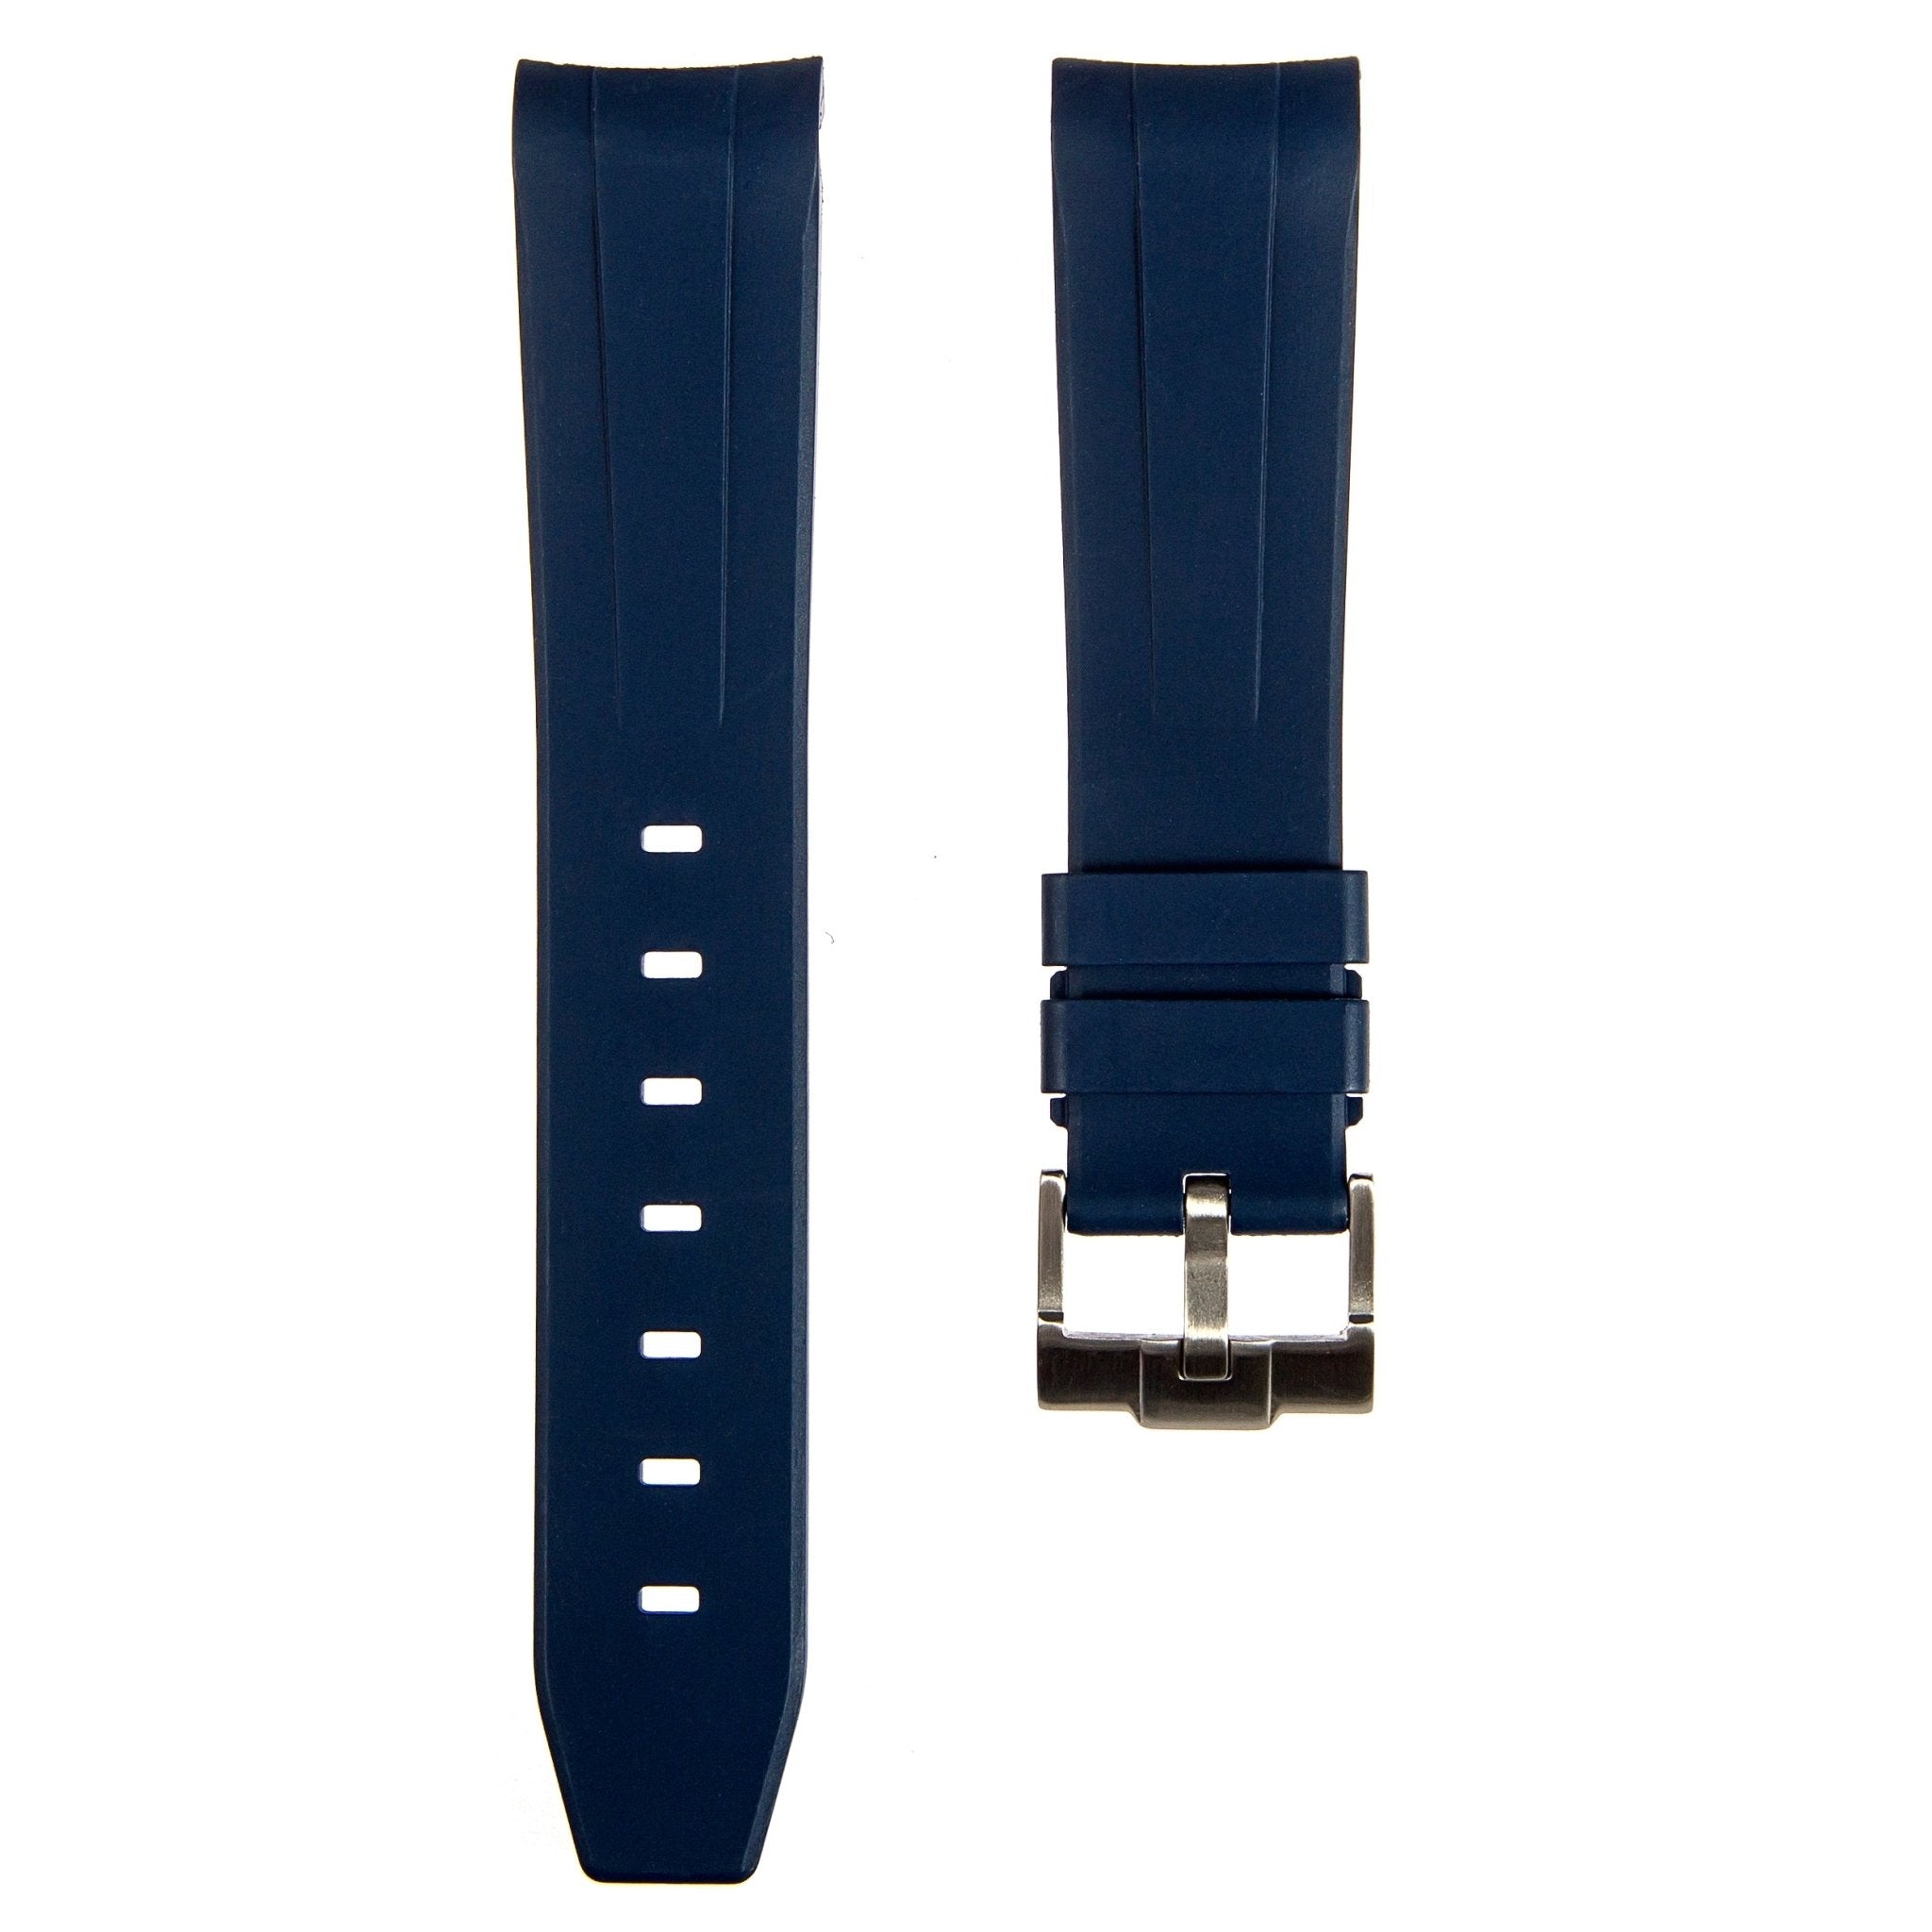 Forge Curved End FKM Rubber Strap – Compatible with Rolex Submariner – Navy (2421) -Strapseeker